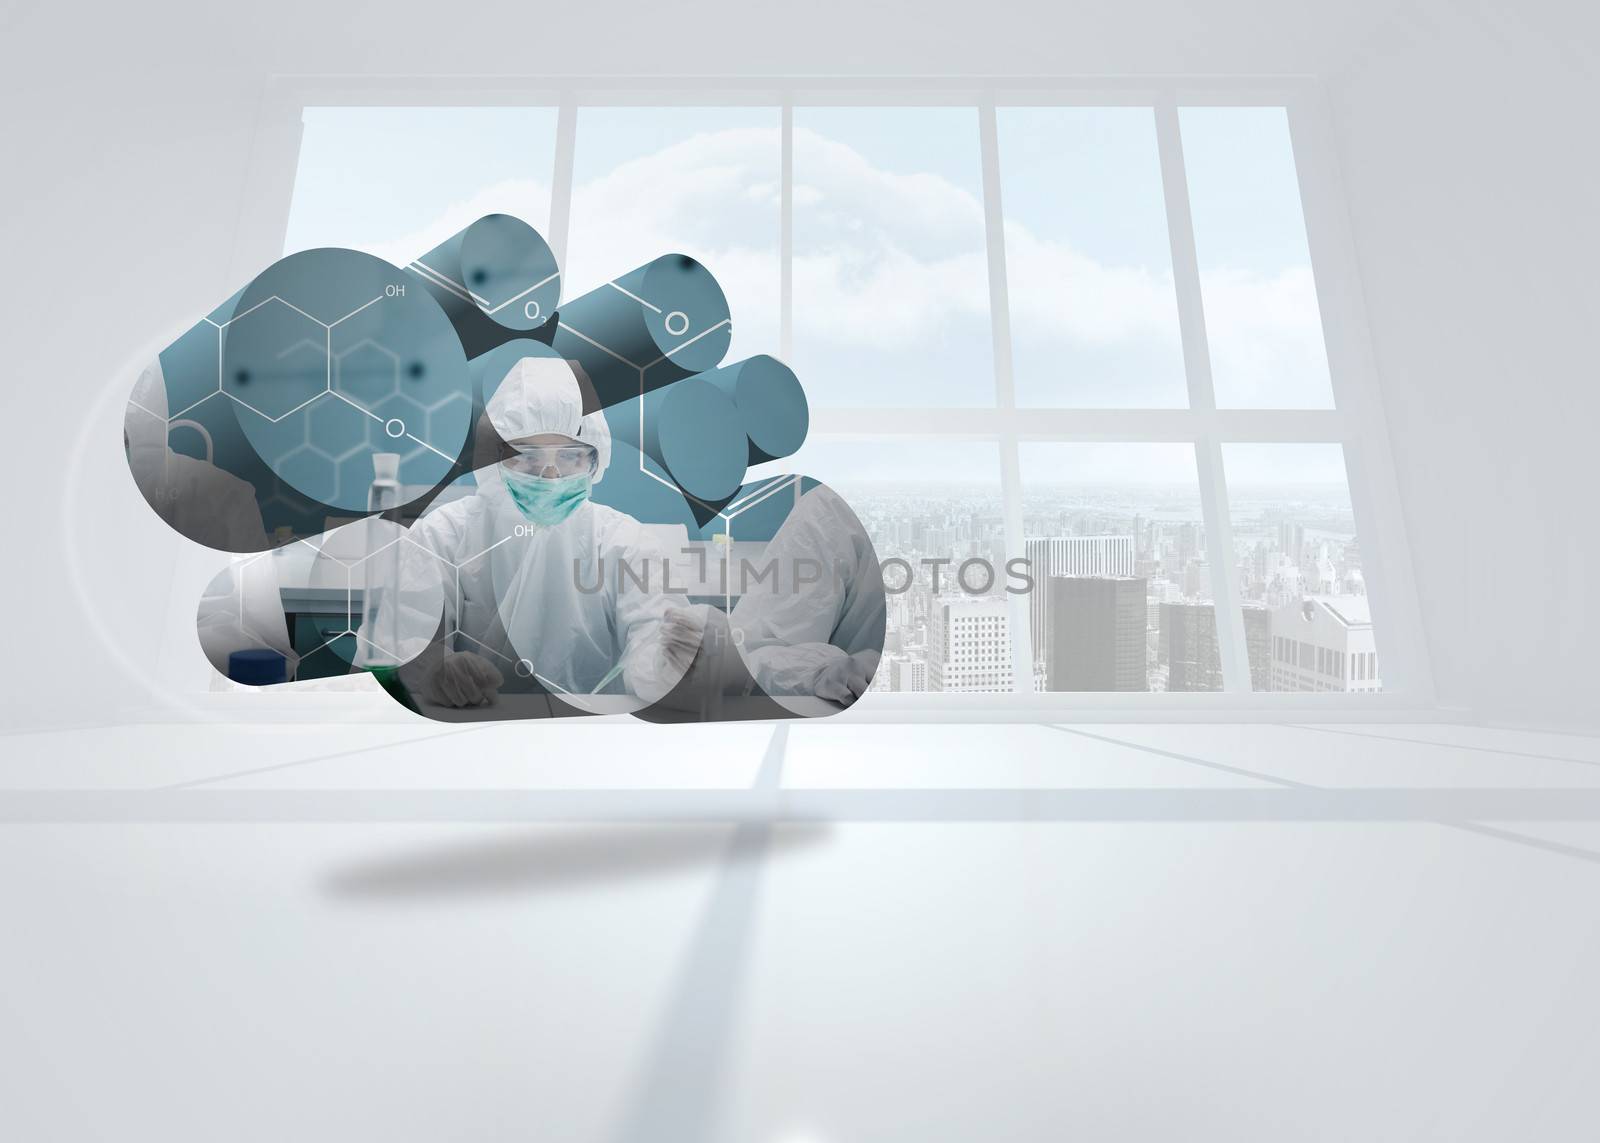 Scientist on abstract screen against bright white room with windows